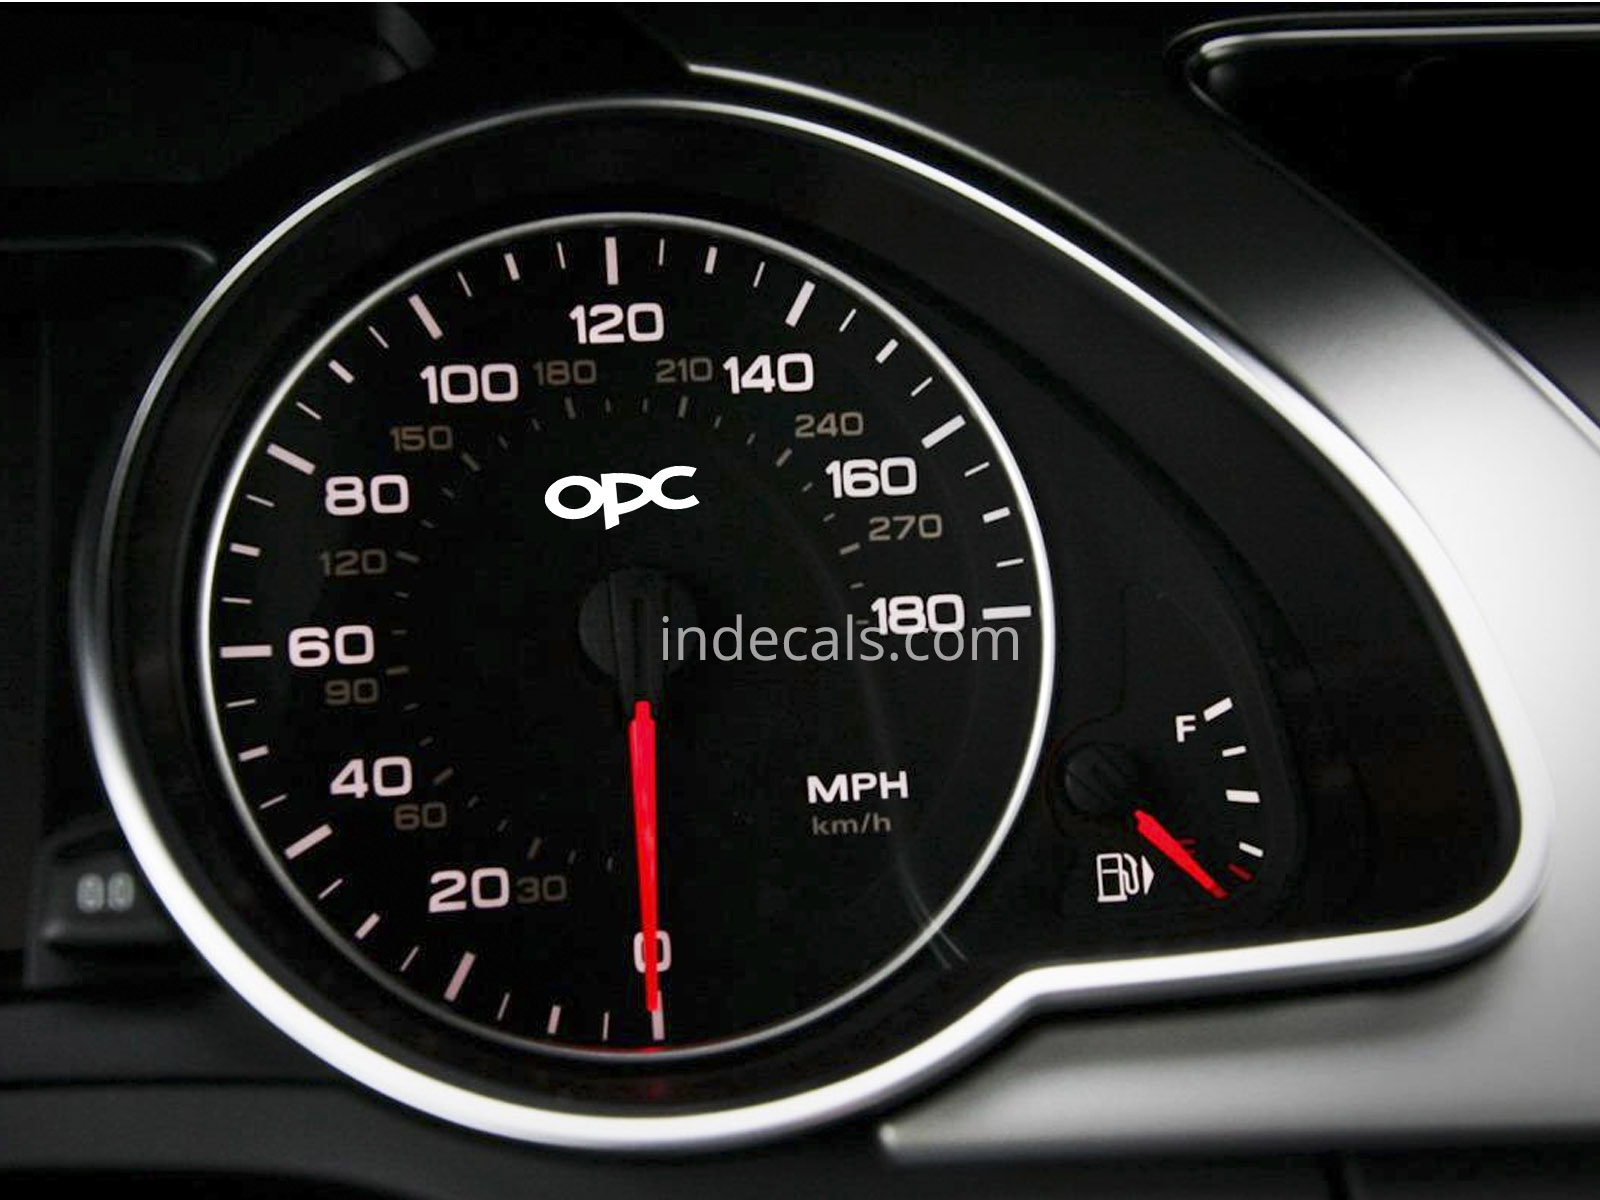 3 x Opel OPC Stickers for Speedometer - White